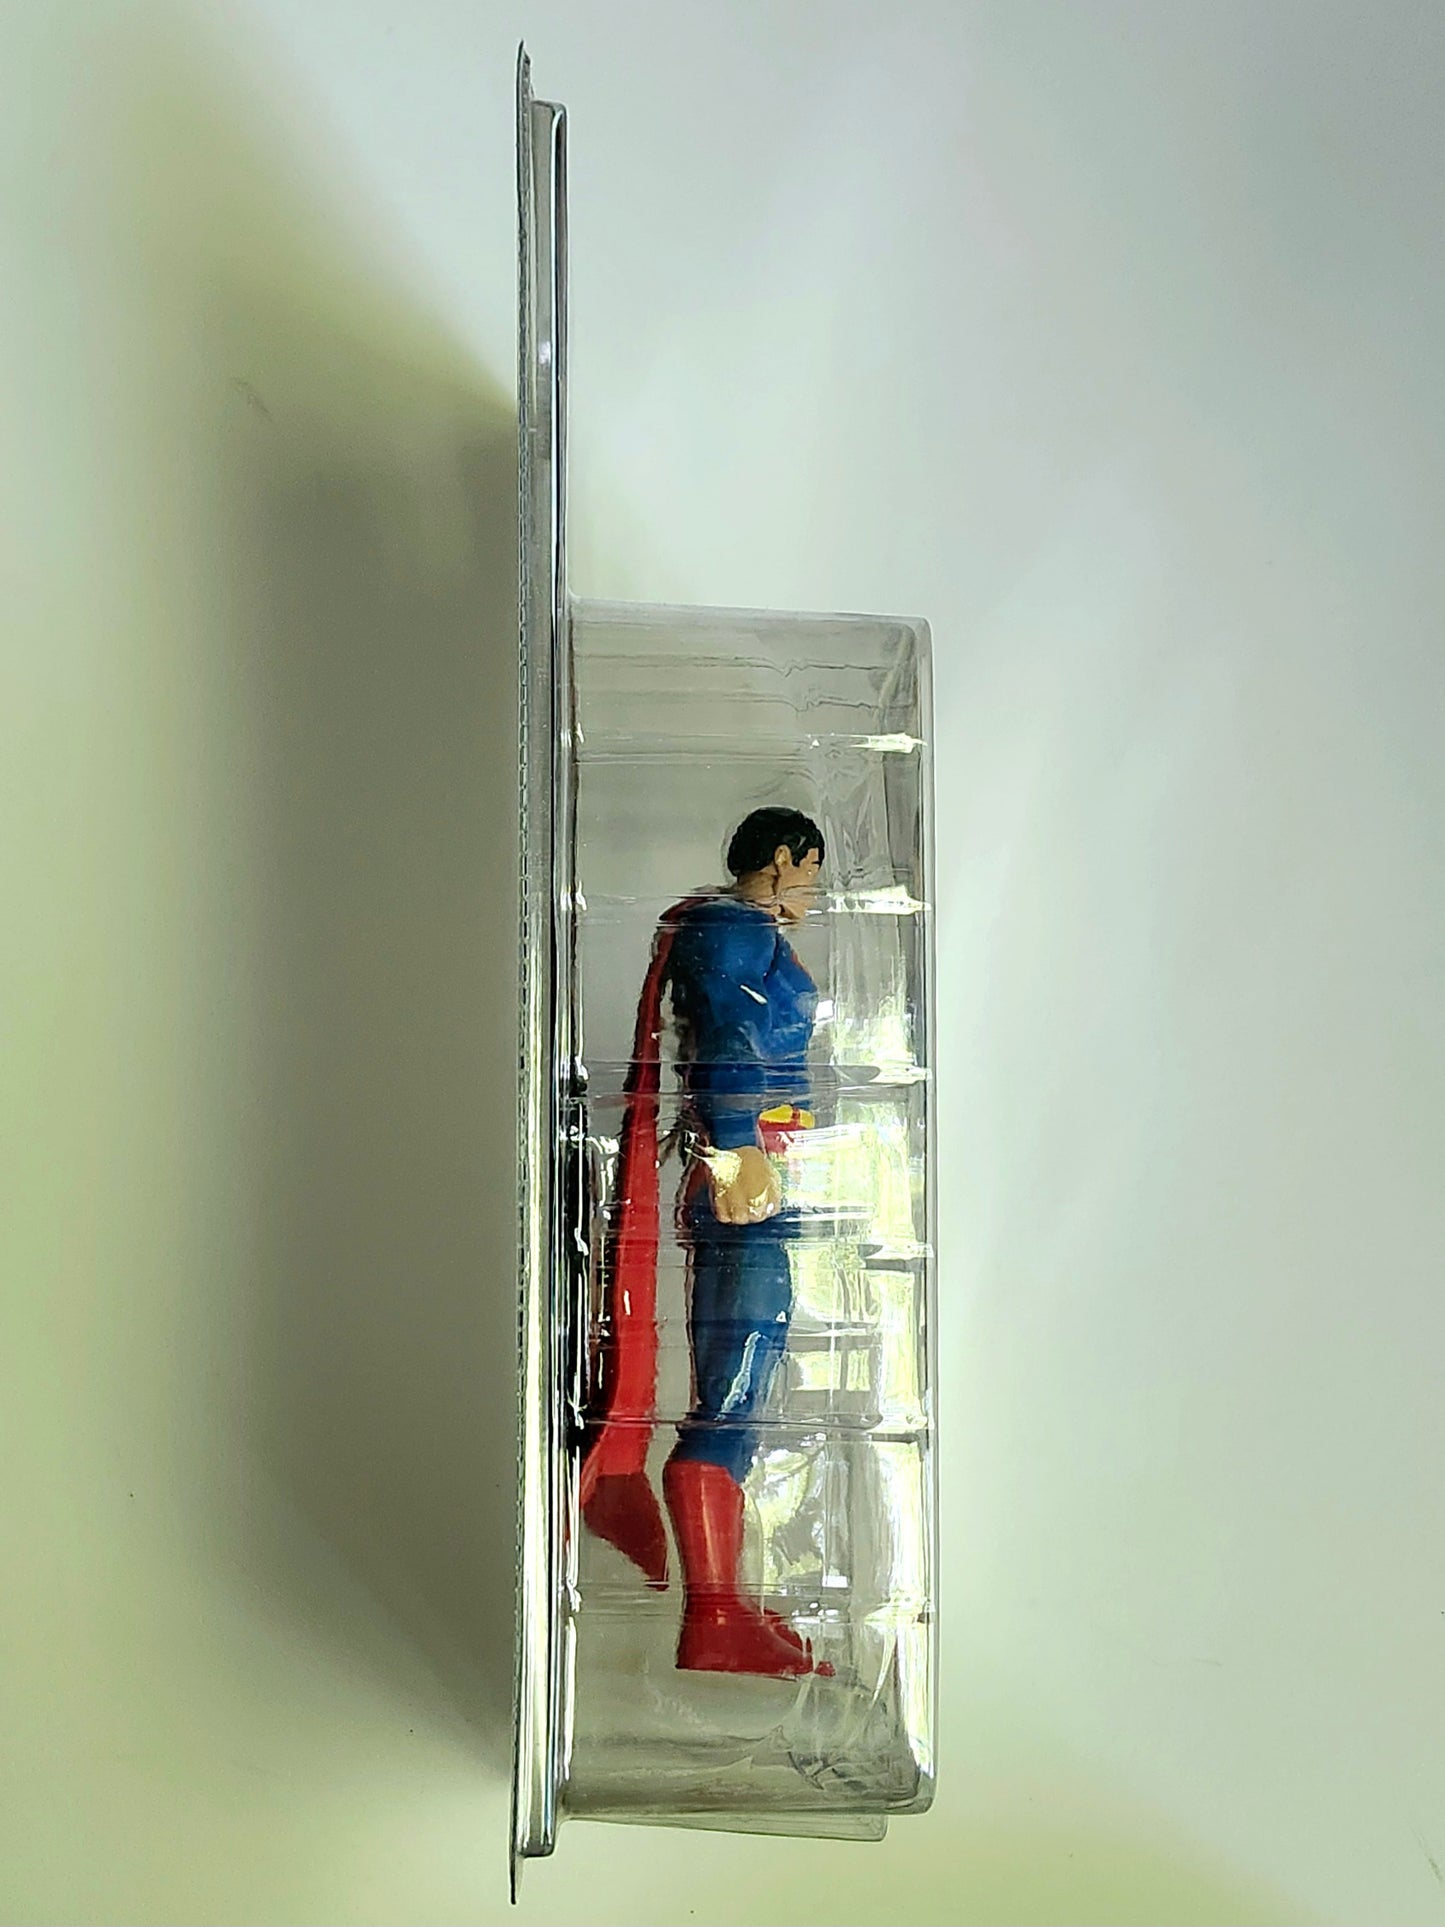 JLA Identity Crisis Classics Series 1 Superman Action Figure from DC Direct